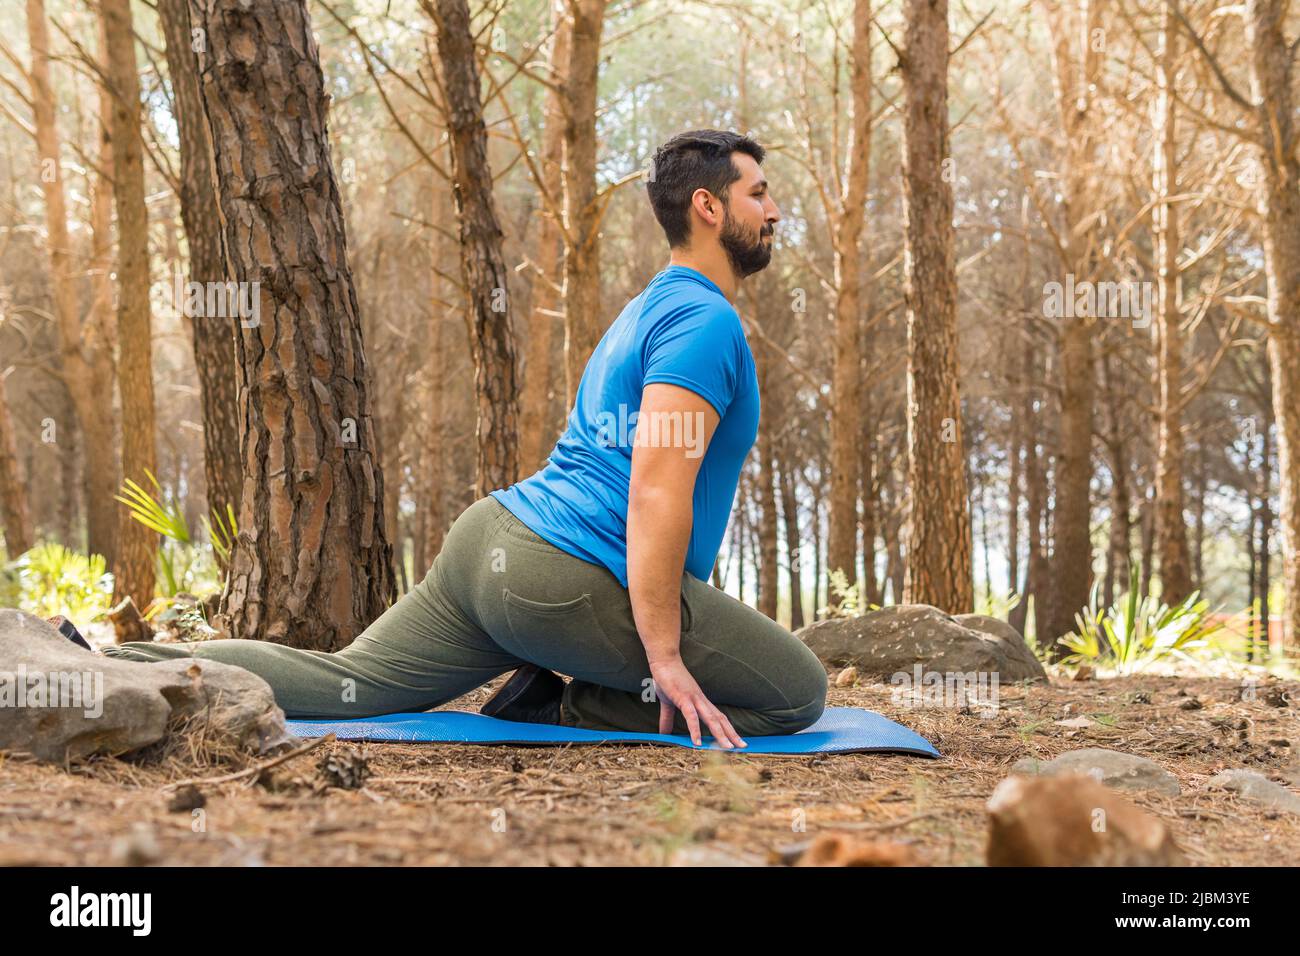 Handsome young man practicing yoga stretching at sunset in the forest surrounded by trees on his blue mat. Stock Photo